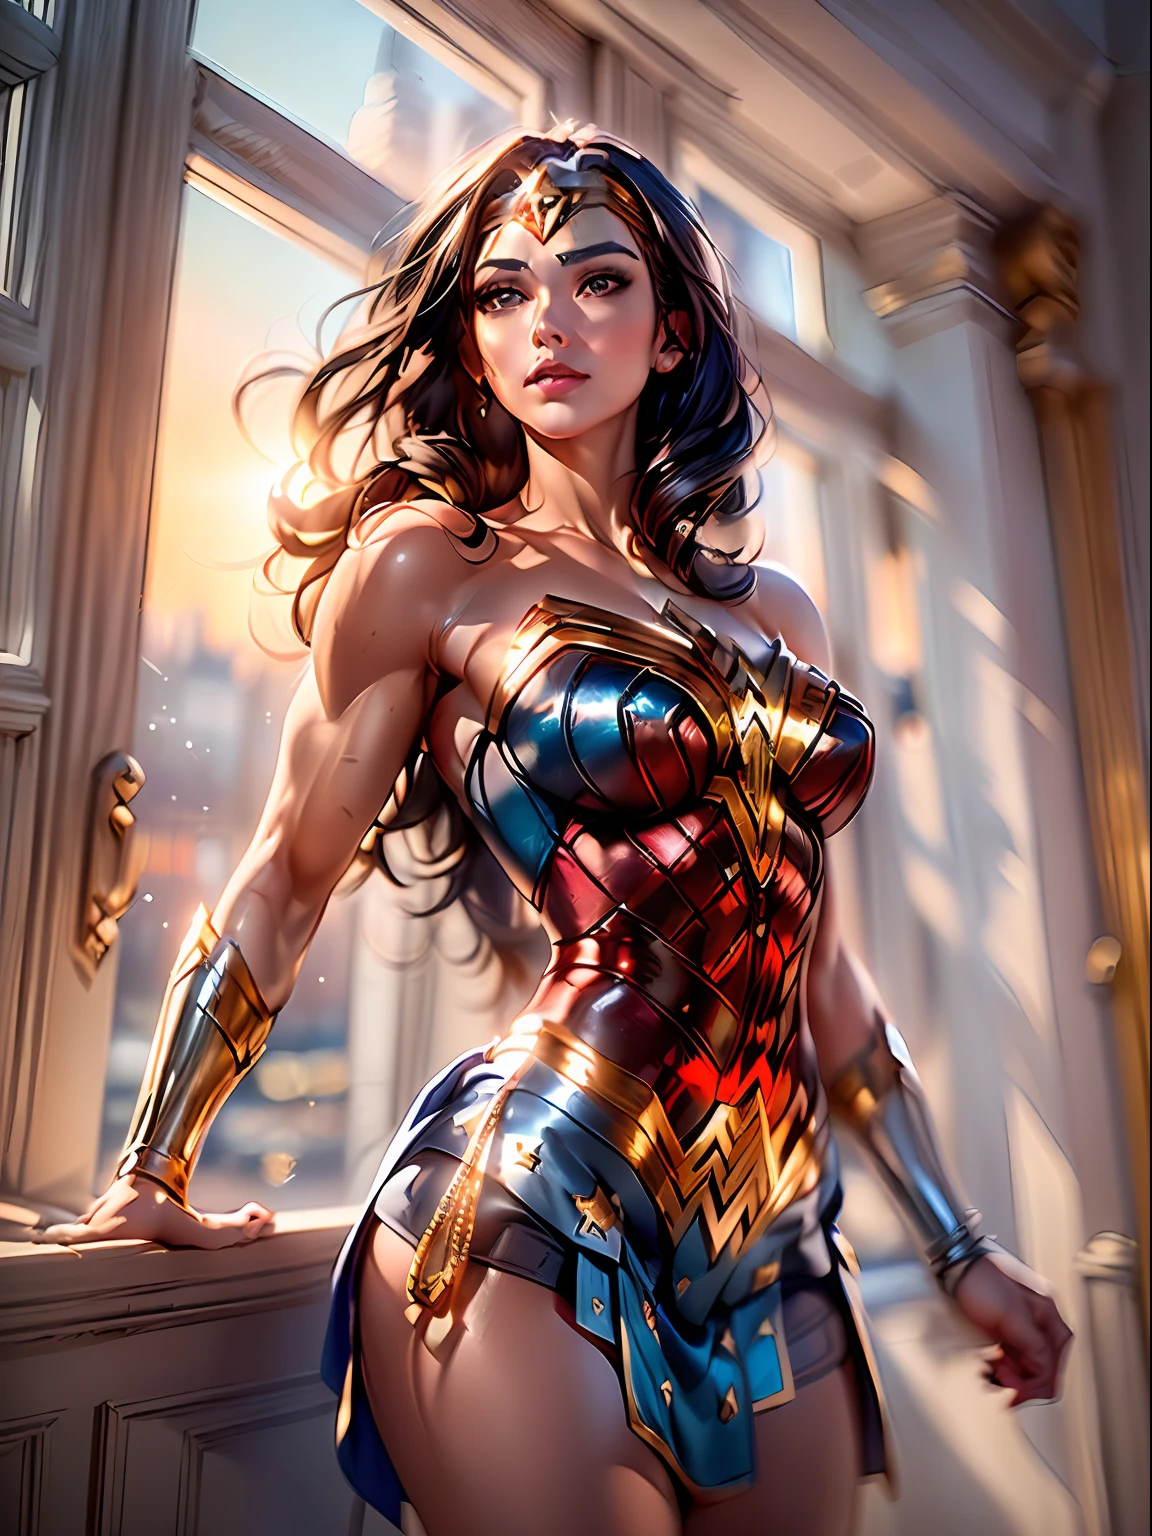 (Masterpiece, high resolucion, Realistis:1.4), (It depicts a stunning Wonder Woman leaning against a window on the top floor of the building:1.3), (Her face was basking in the warm sunshine, With the wind, She gently shook her flowing dark hair:1.2), (Her eyes are an alluring blue, It sparkles intensely:1.4), (Her flawless skin-radiating beauty:1.3), (Her body exudes charm and perfection, wearing a wonder woman costume:1.2), tiara, red and gold bustier, blue leotard with white stars, silver bracelets, (Red knee high boots:1.2), golden belt, (Wonder Woman clothing:1.0), bare shoulder, ((light tan skin: 1.4)), mature, Sexy, elastic muscles, (Muscular: 1.2), ((strong and healthy body)), (((the more) Muscular))), cleavage, Long leg, curved, rib, thin-waist, soft waist, (fine detailed skin), (beautiful and sexy woman), (swollen lips: 0.9), (eyeslashes: 1.2), very delicate muscles, (Canon EOS R5 Mirrorless Camera:1.3), (Pairing with Canon RF 85mm f/1.2L USM lens:1.3), (Capture every detail of her captivating presence:1.2), (Hotel room settings with panoramic cityscapes:1.3), (Floor-to-ceiling windows let in plenty of natural light.:1.2), (silky, The modern interior design adds to the charm:1.1), (Enchanting photo of a model with the most symmetrical and beautiful face in the world:1.4)